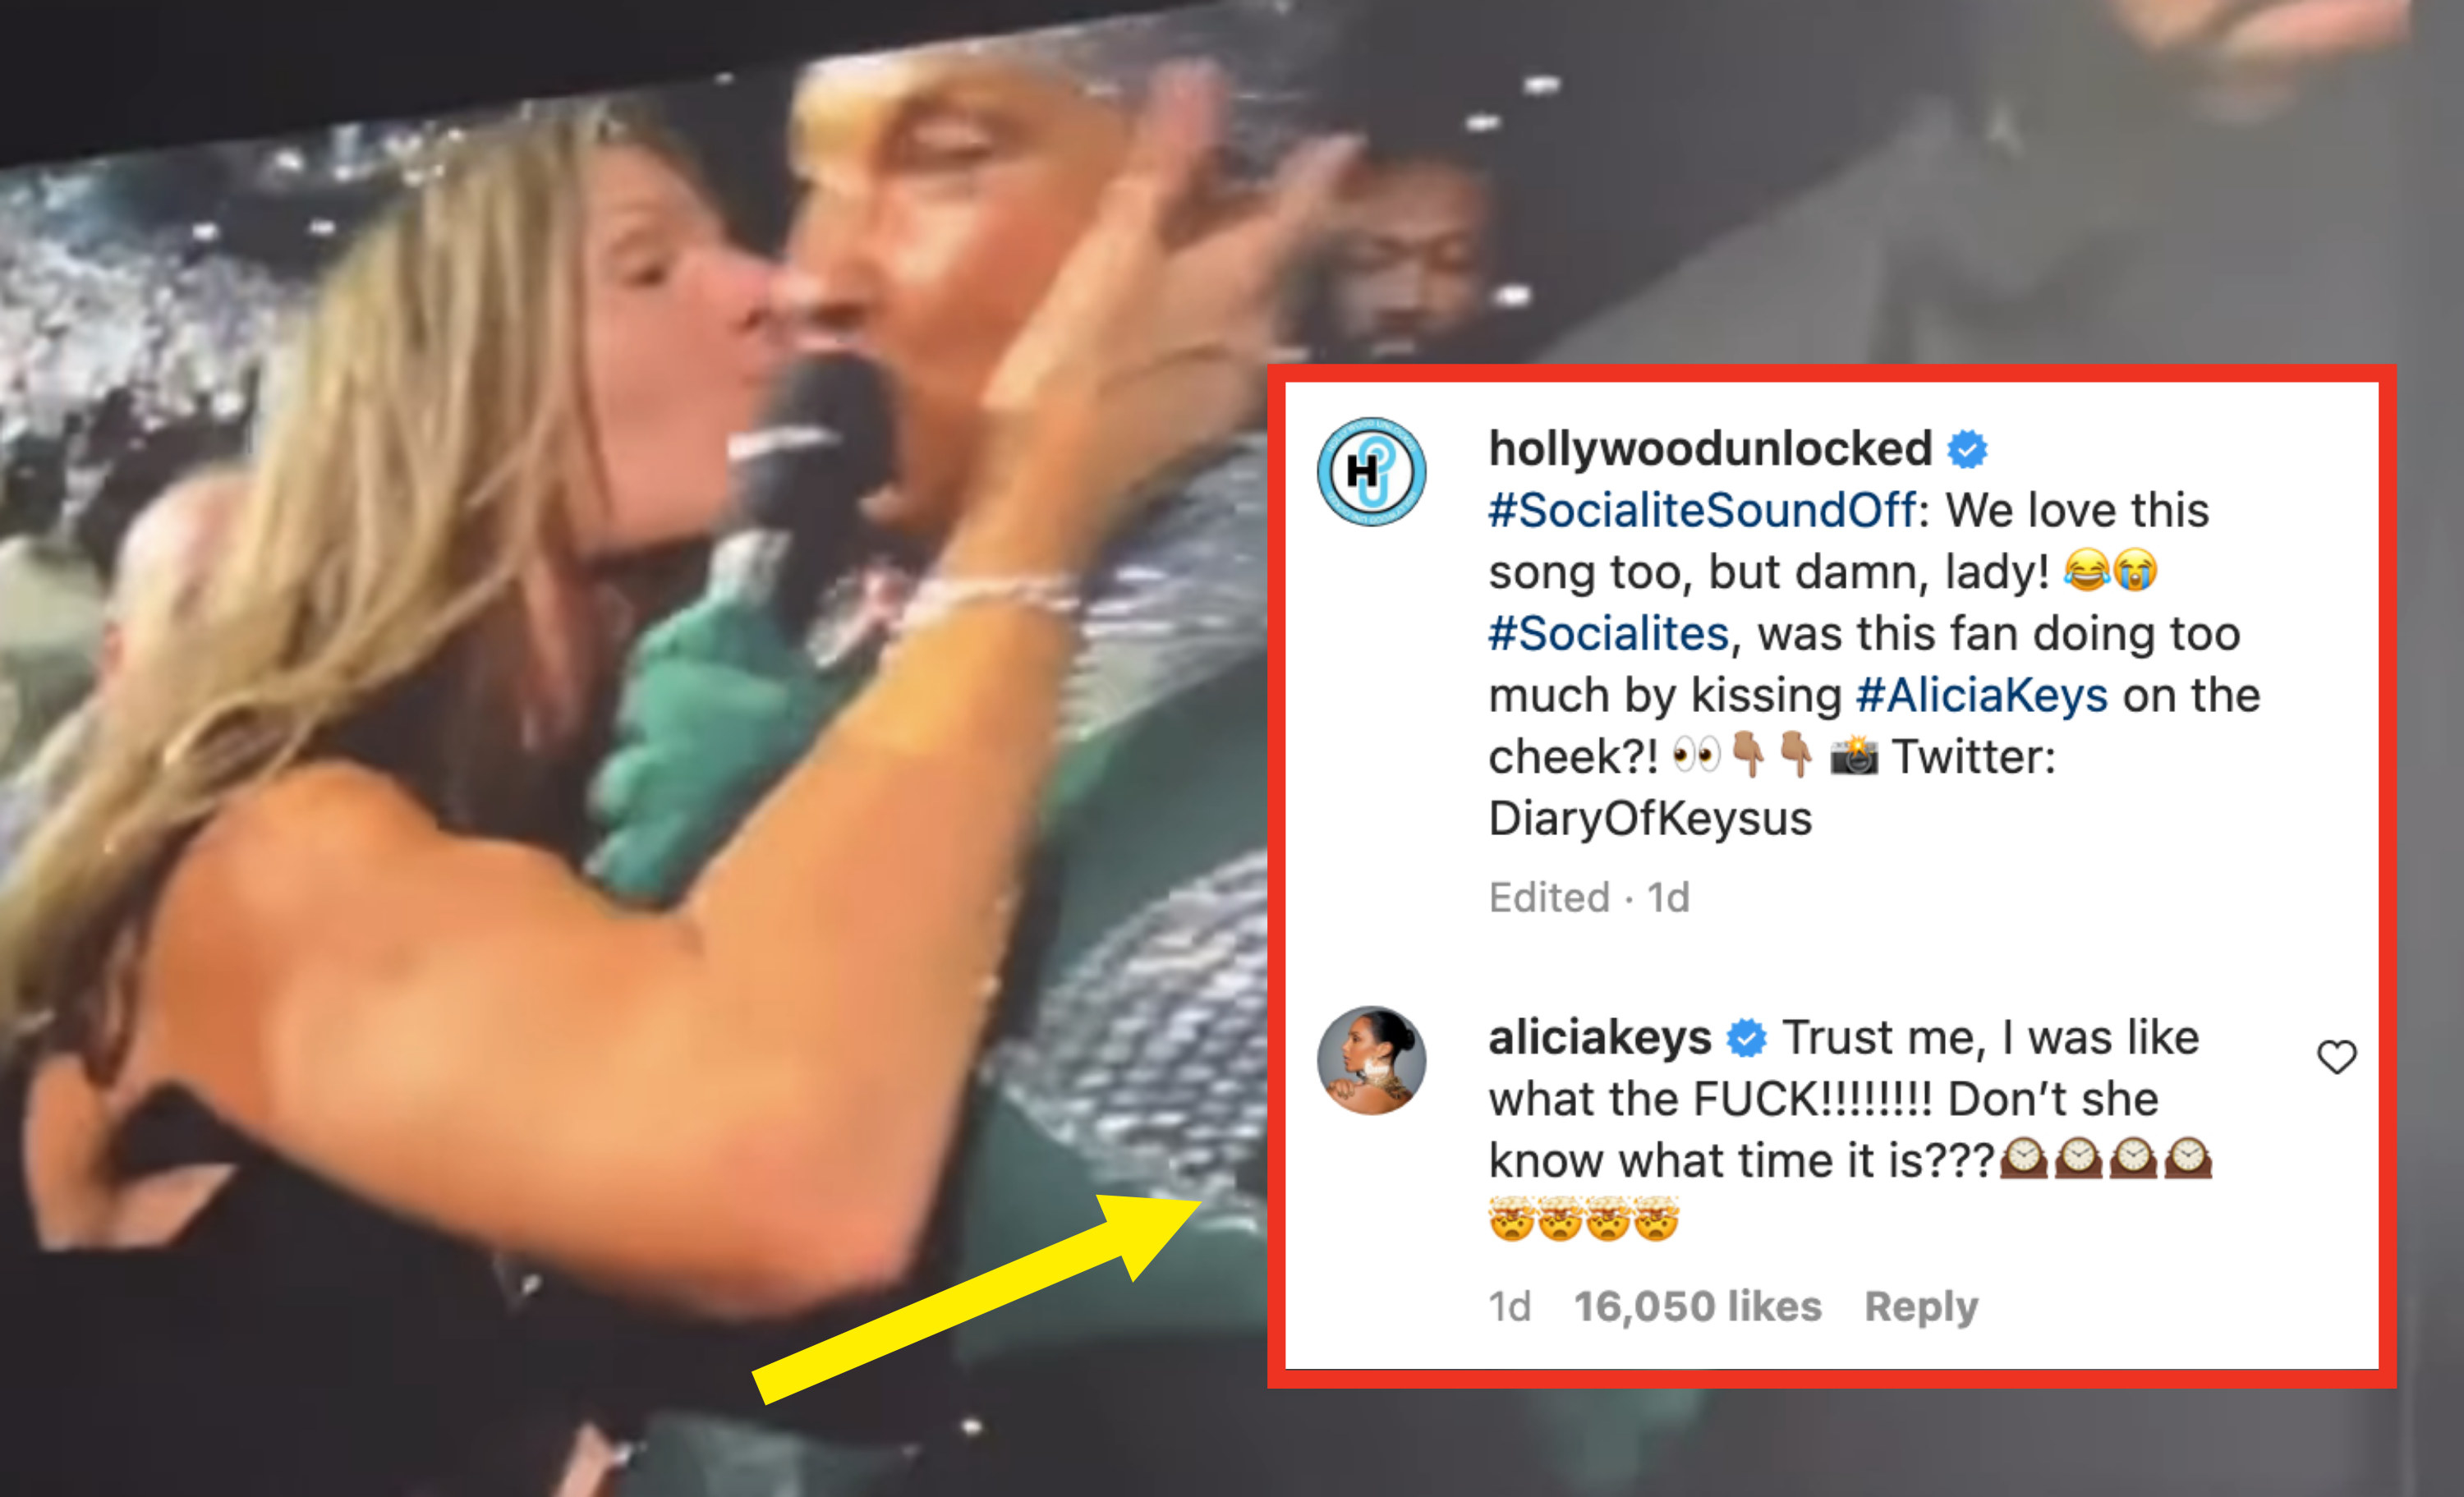 Fans kissing Alicia Keys and her response on Instagram